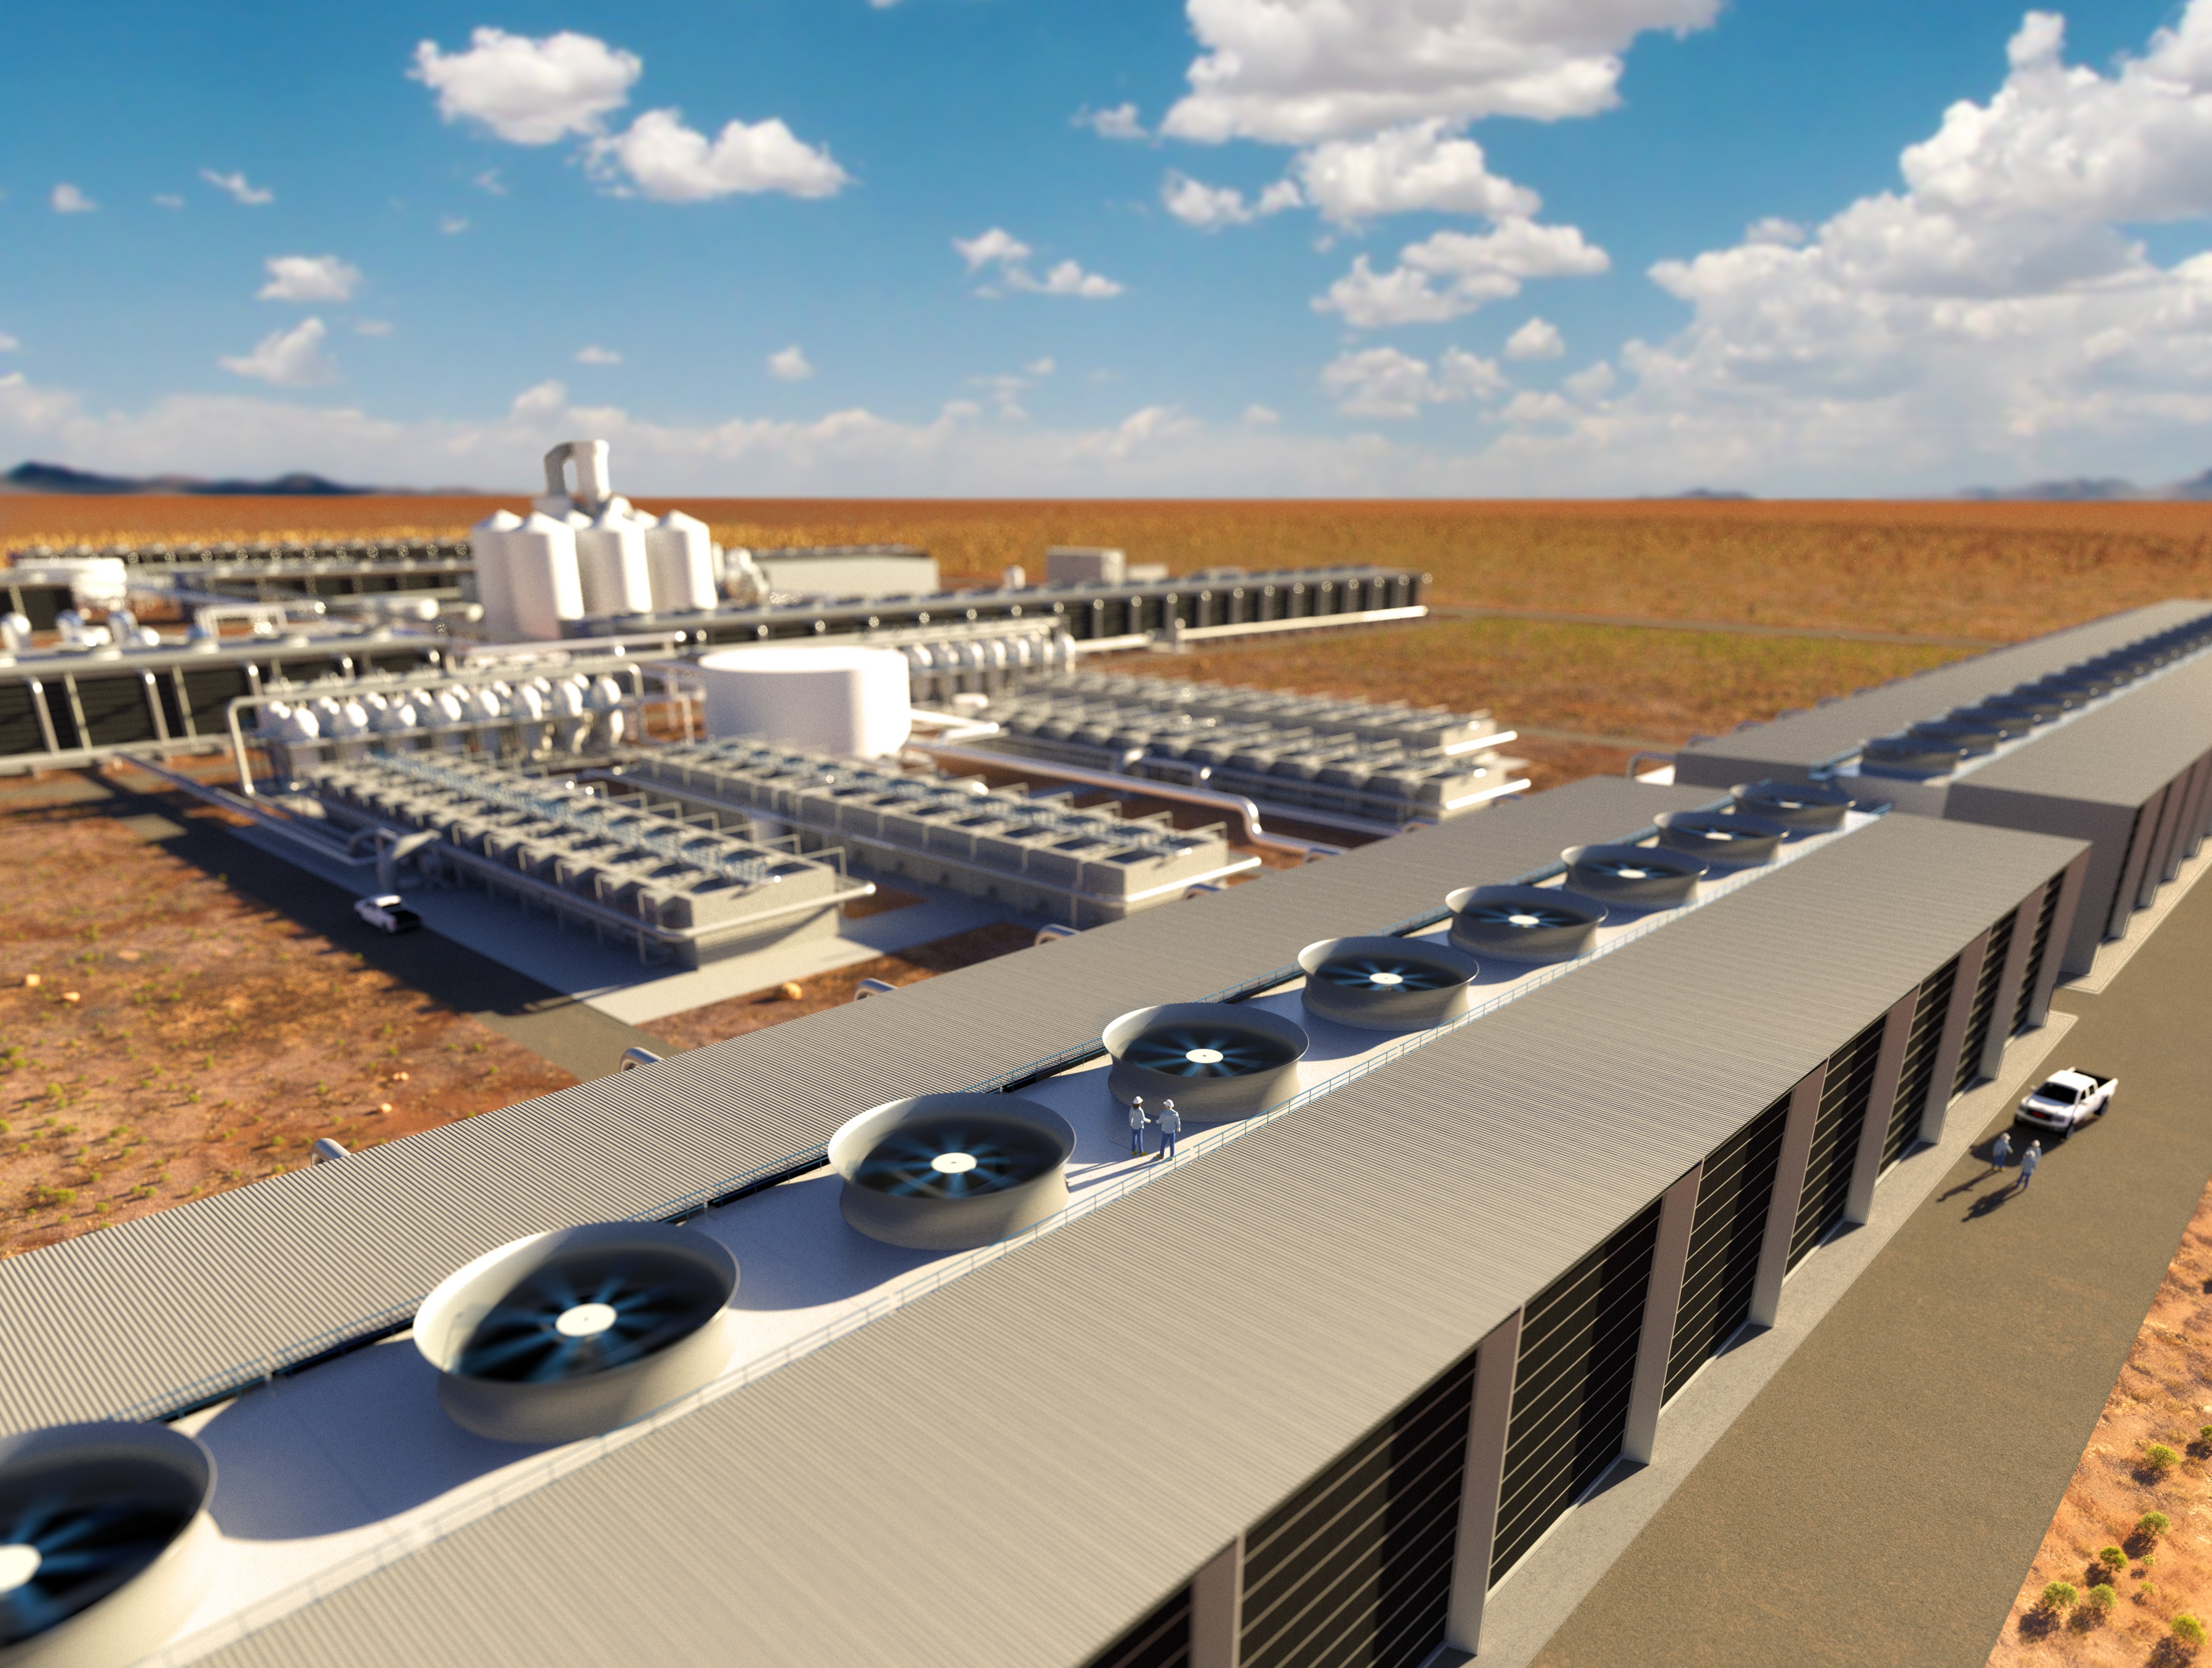 An artist rendering of Carbon Engineering's planned direct-air capture plant in Texas, scheduled to begin operating in 2024. (Courtesy of Carbon Engineering Ltd.)